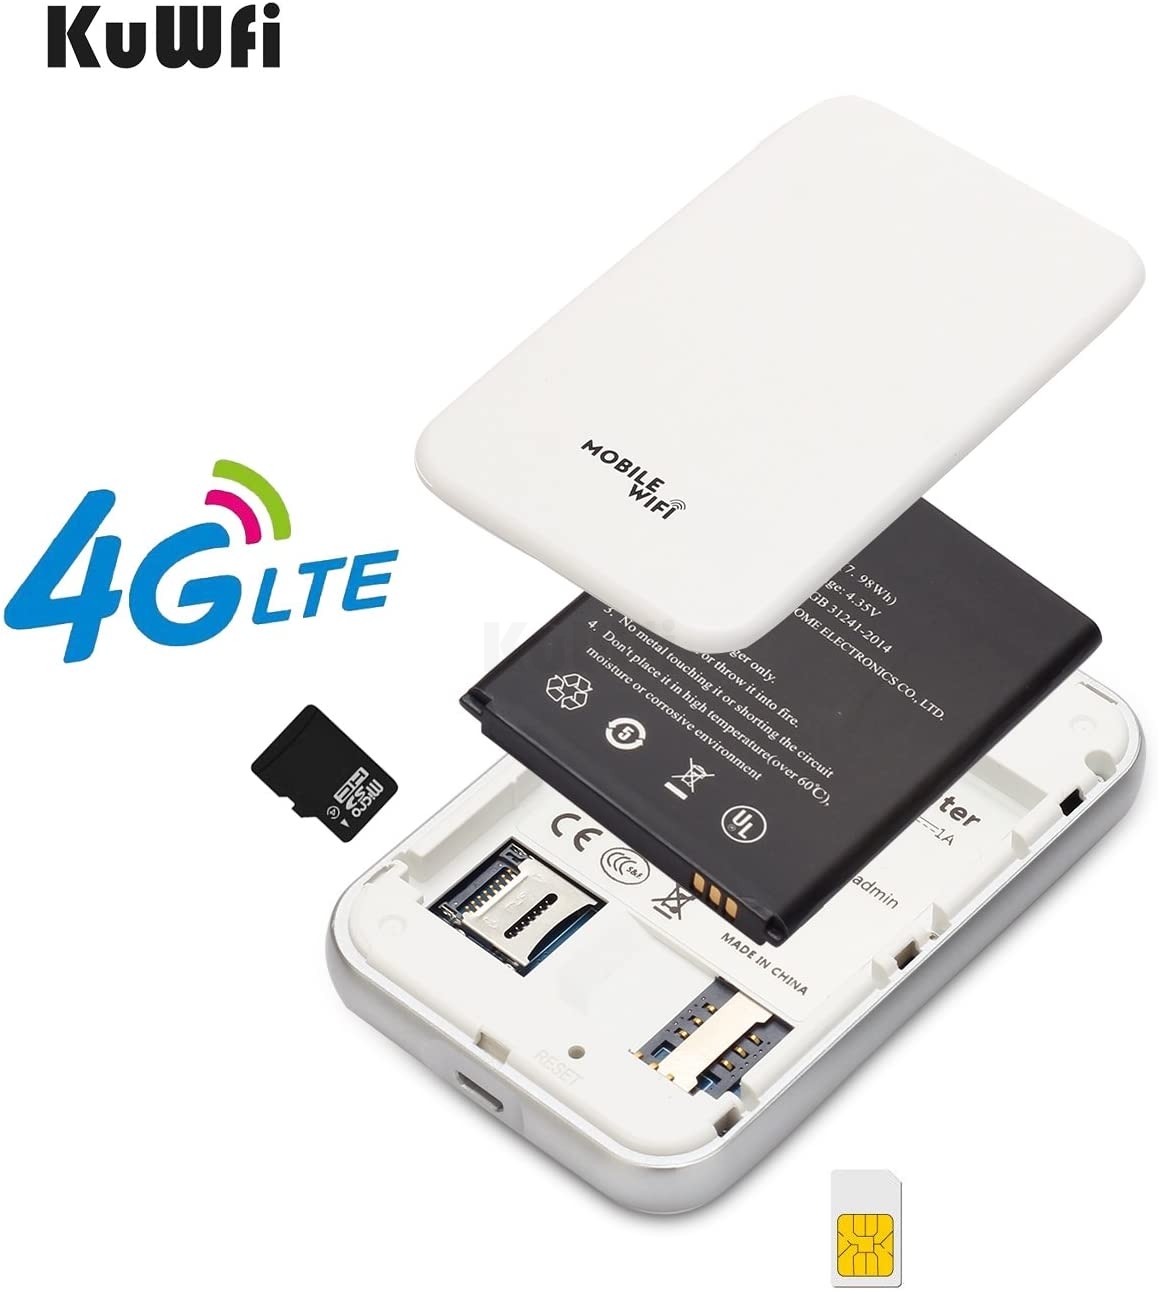 mobile hotspot and travel router